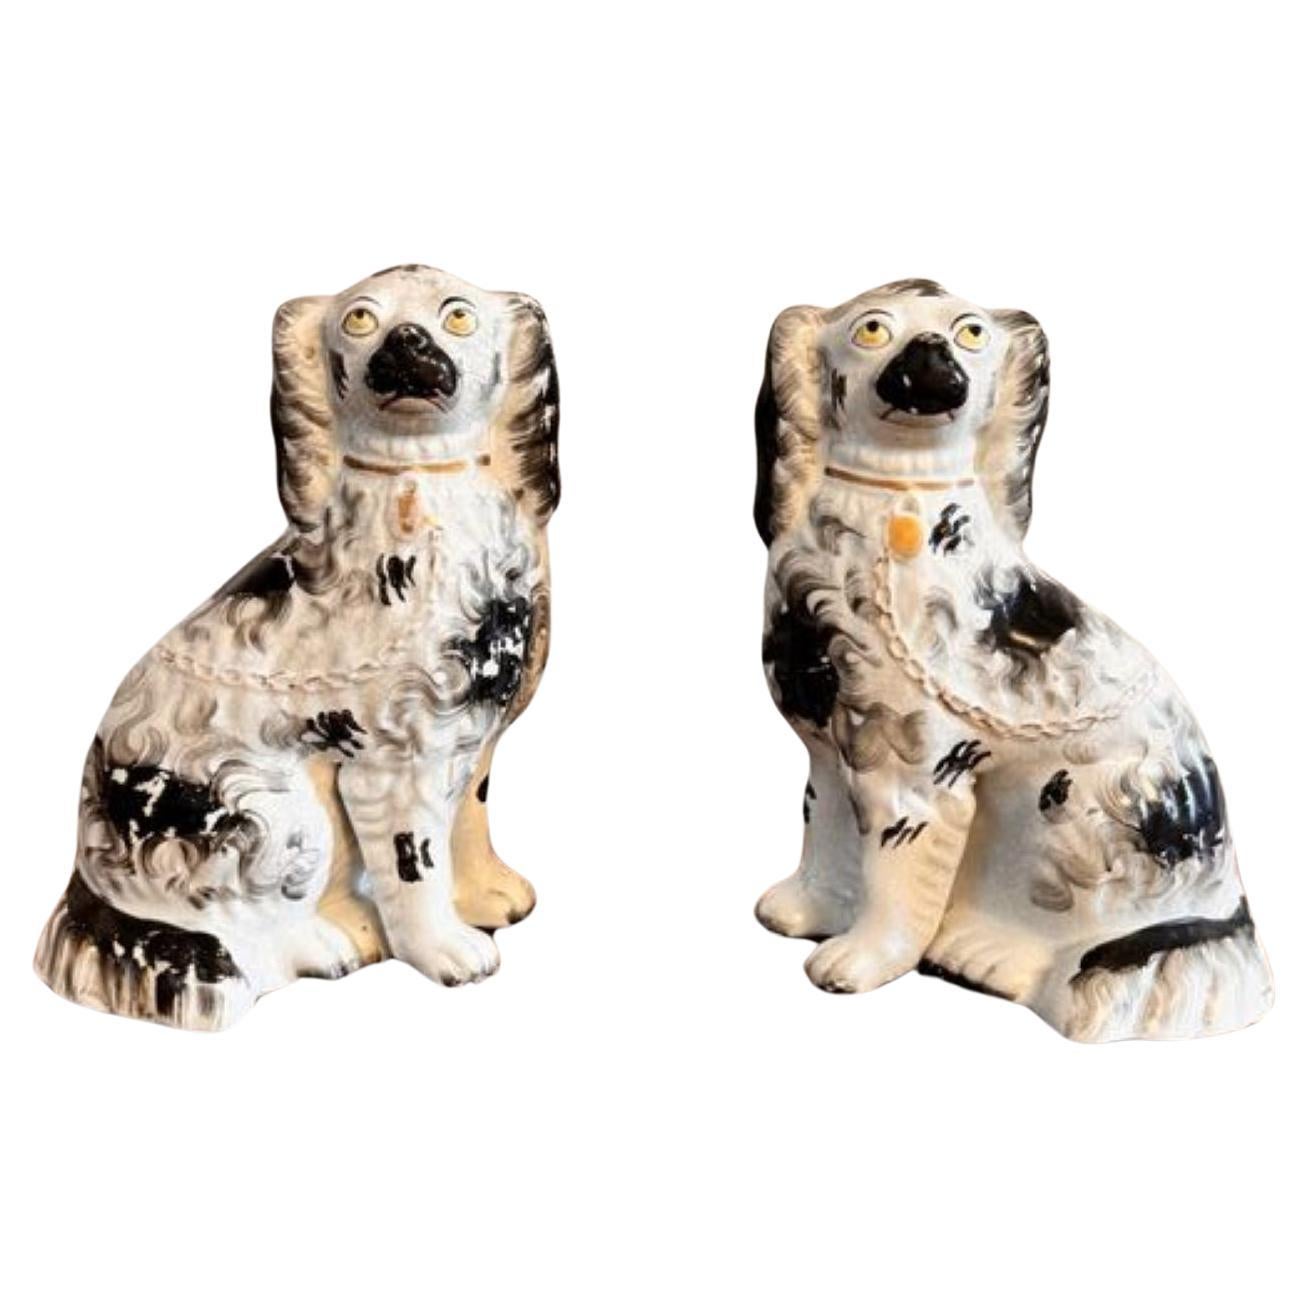 Quality pair of antique Victorian seated Staffordshire dogs For Sale